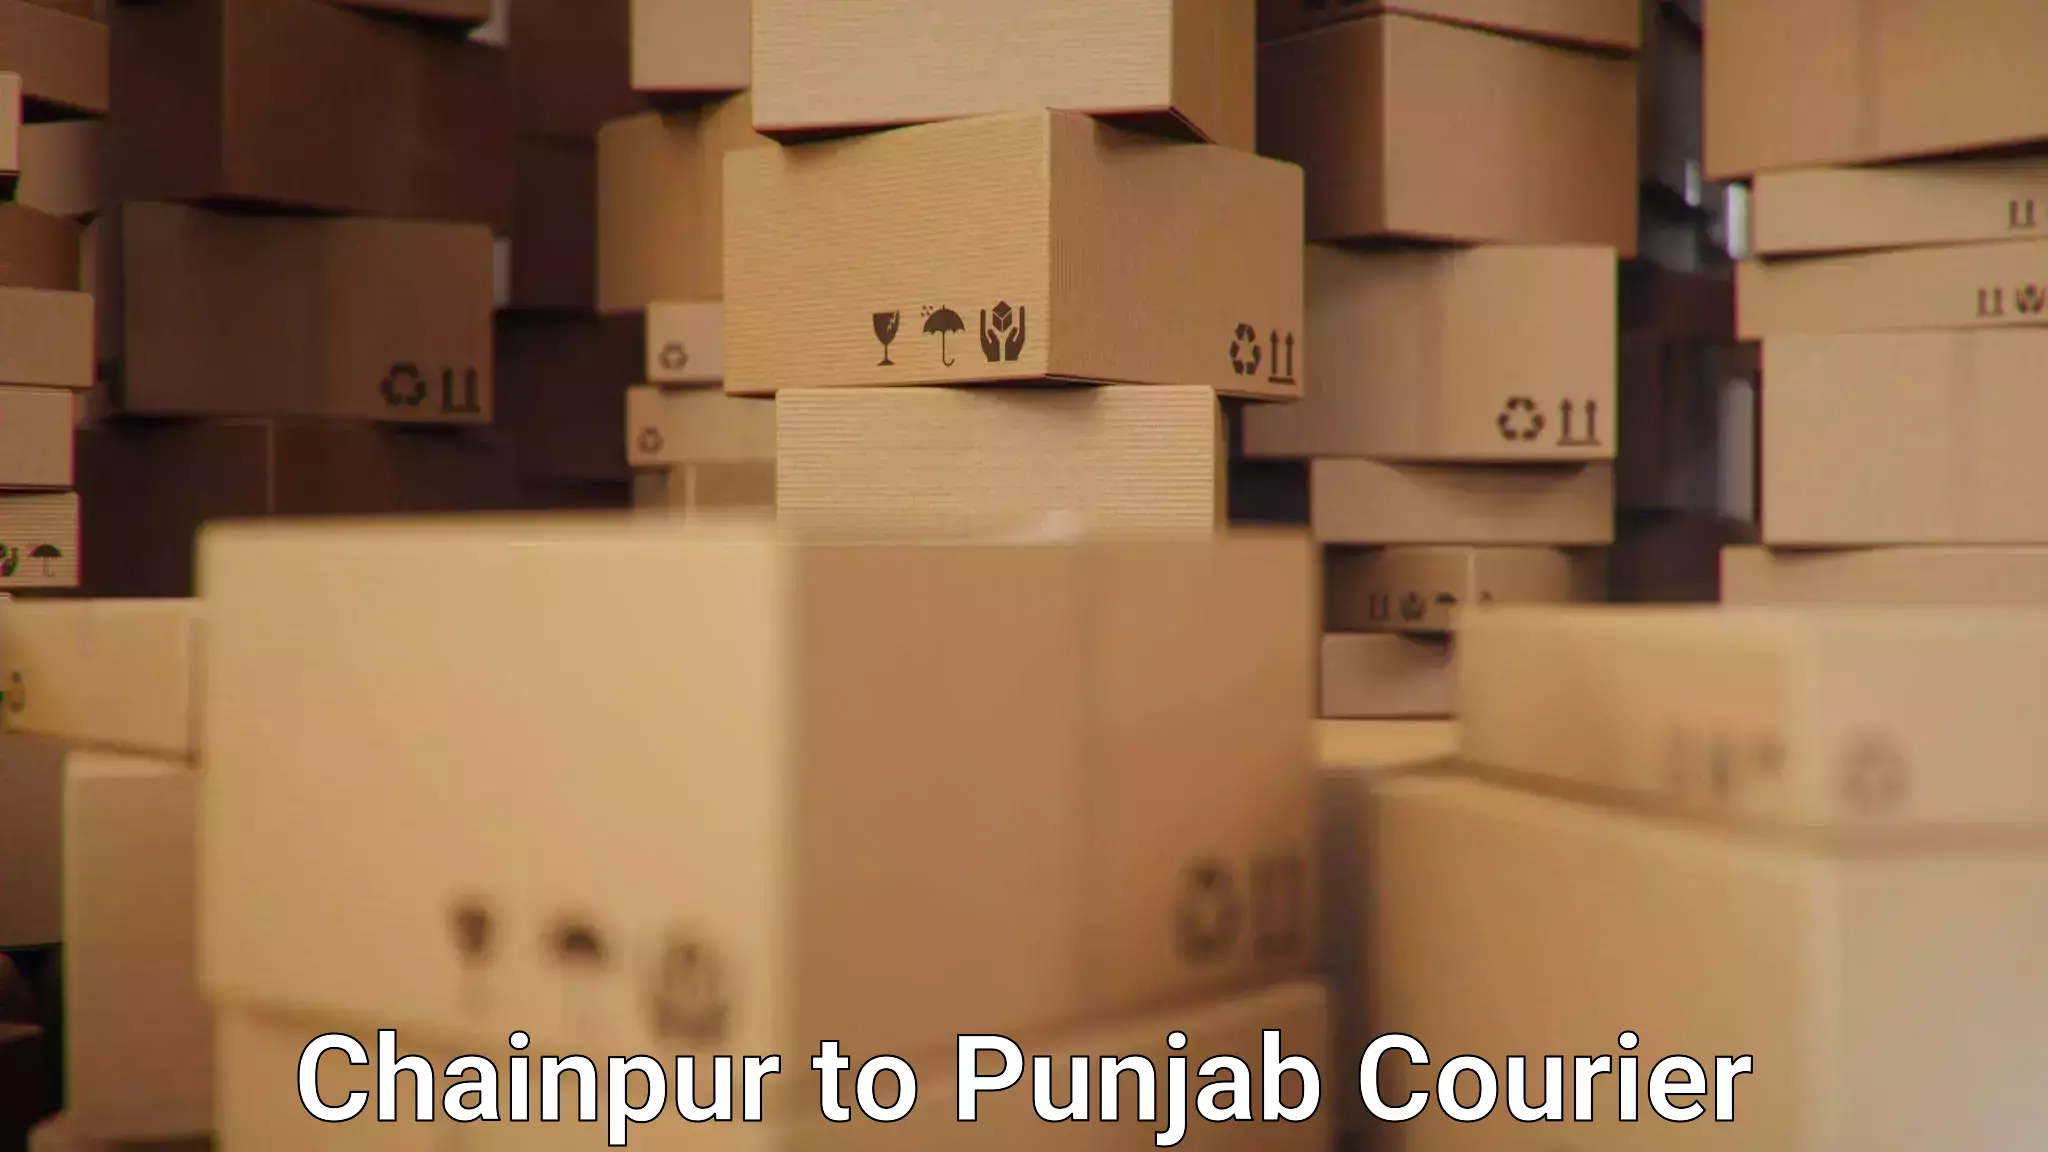 Global courier networks Chainpur to Pathankot